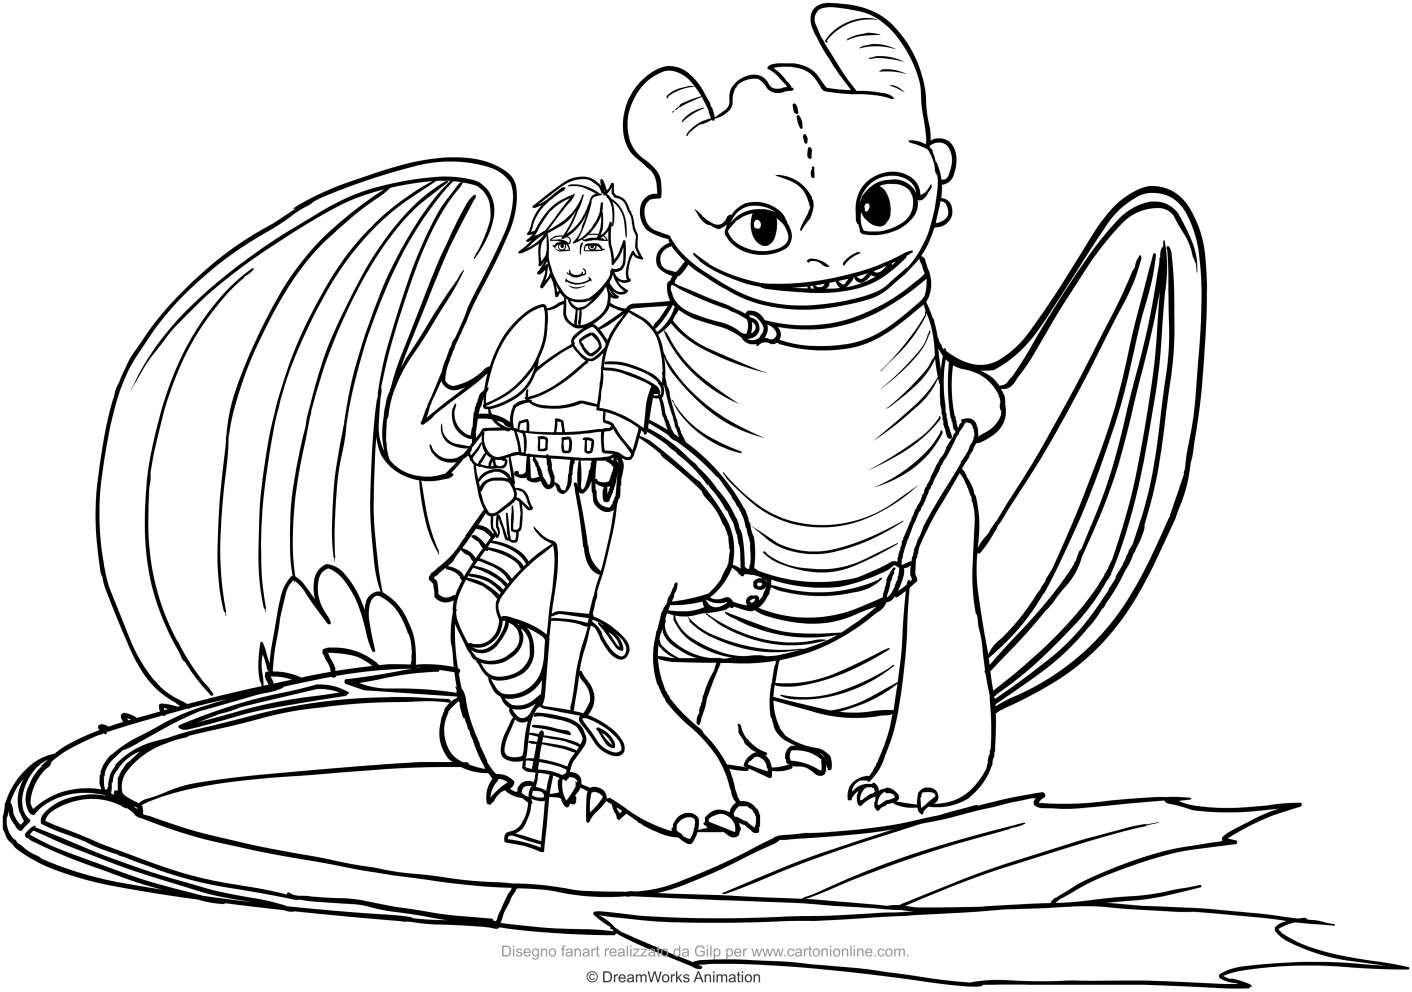 Drawing Hiccup Horrendous Haddock III and Night Fury the dragon coloring pages printable for kids